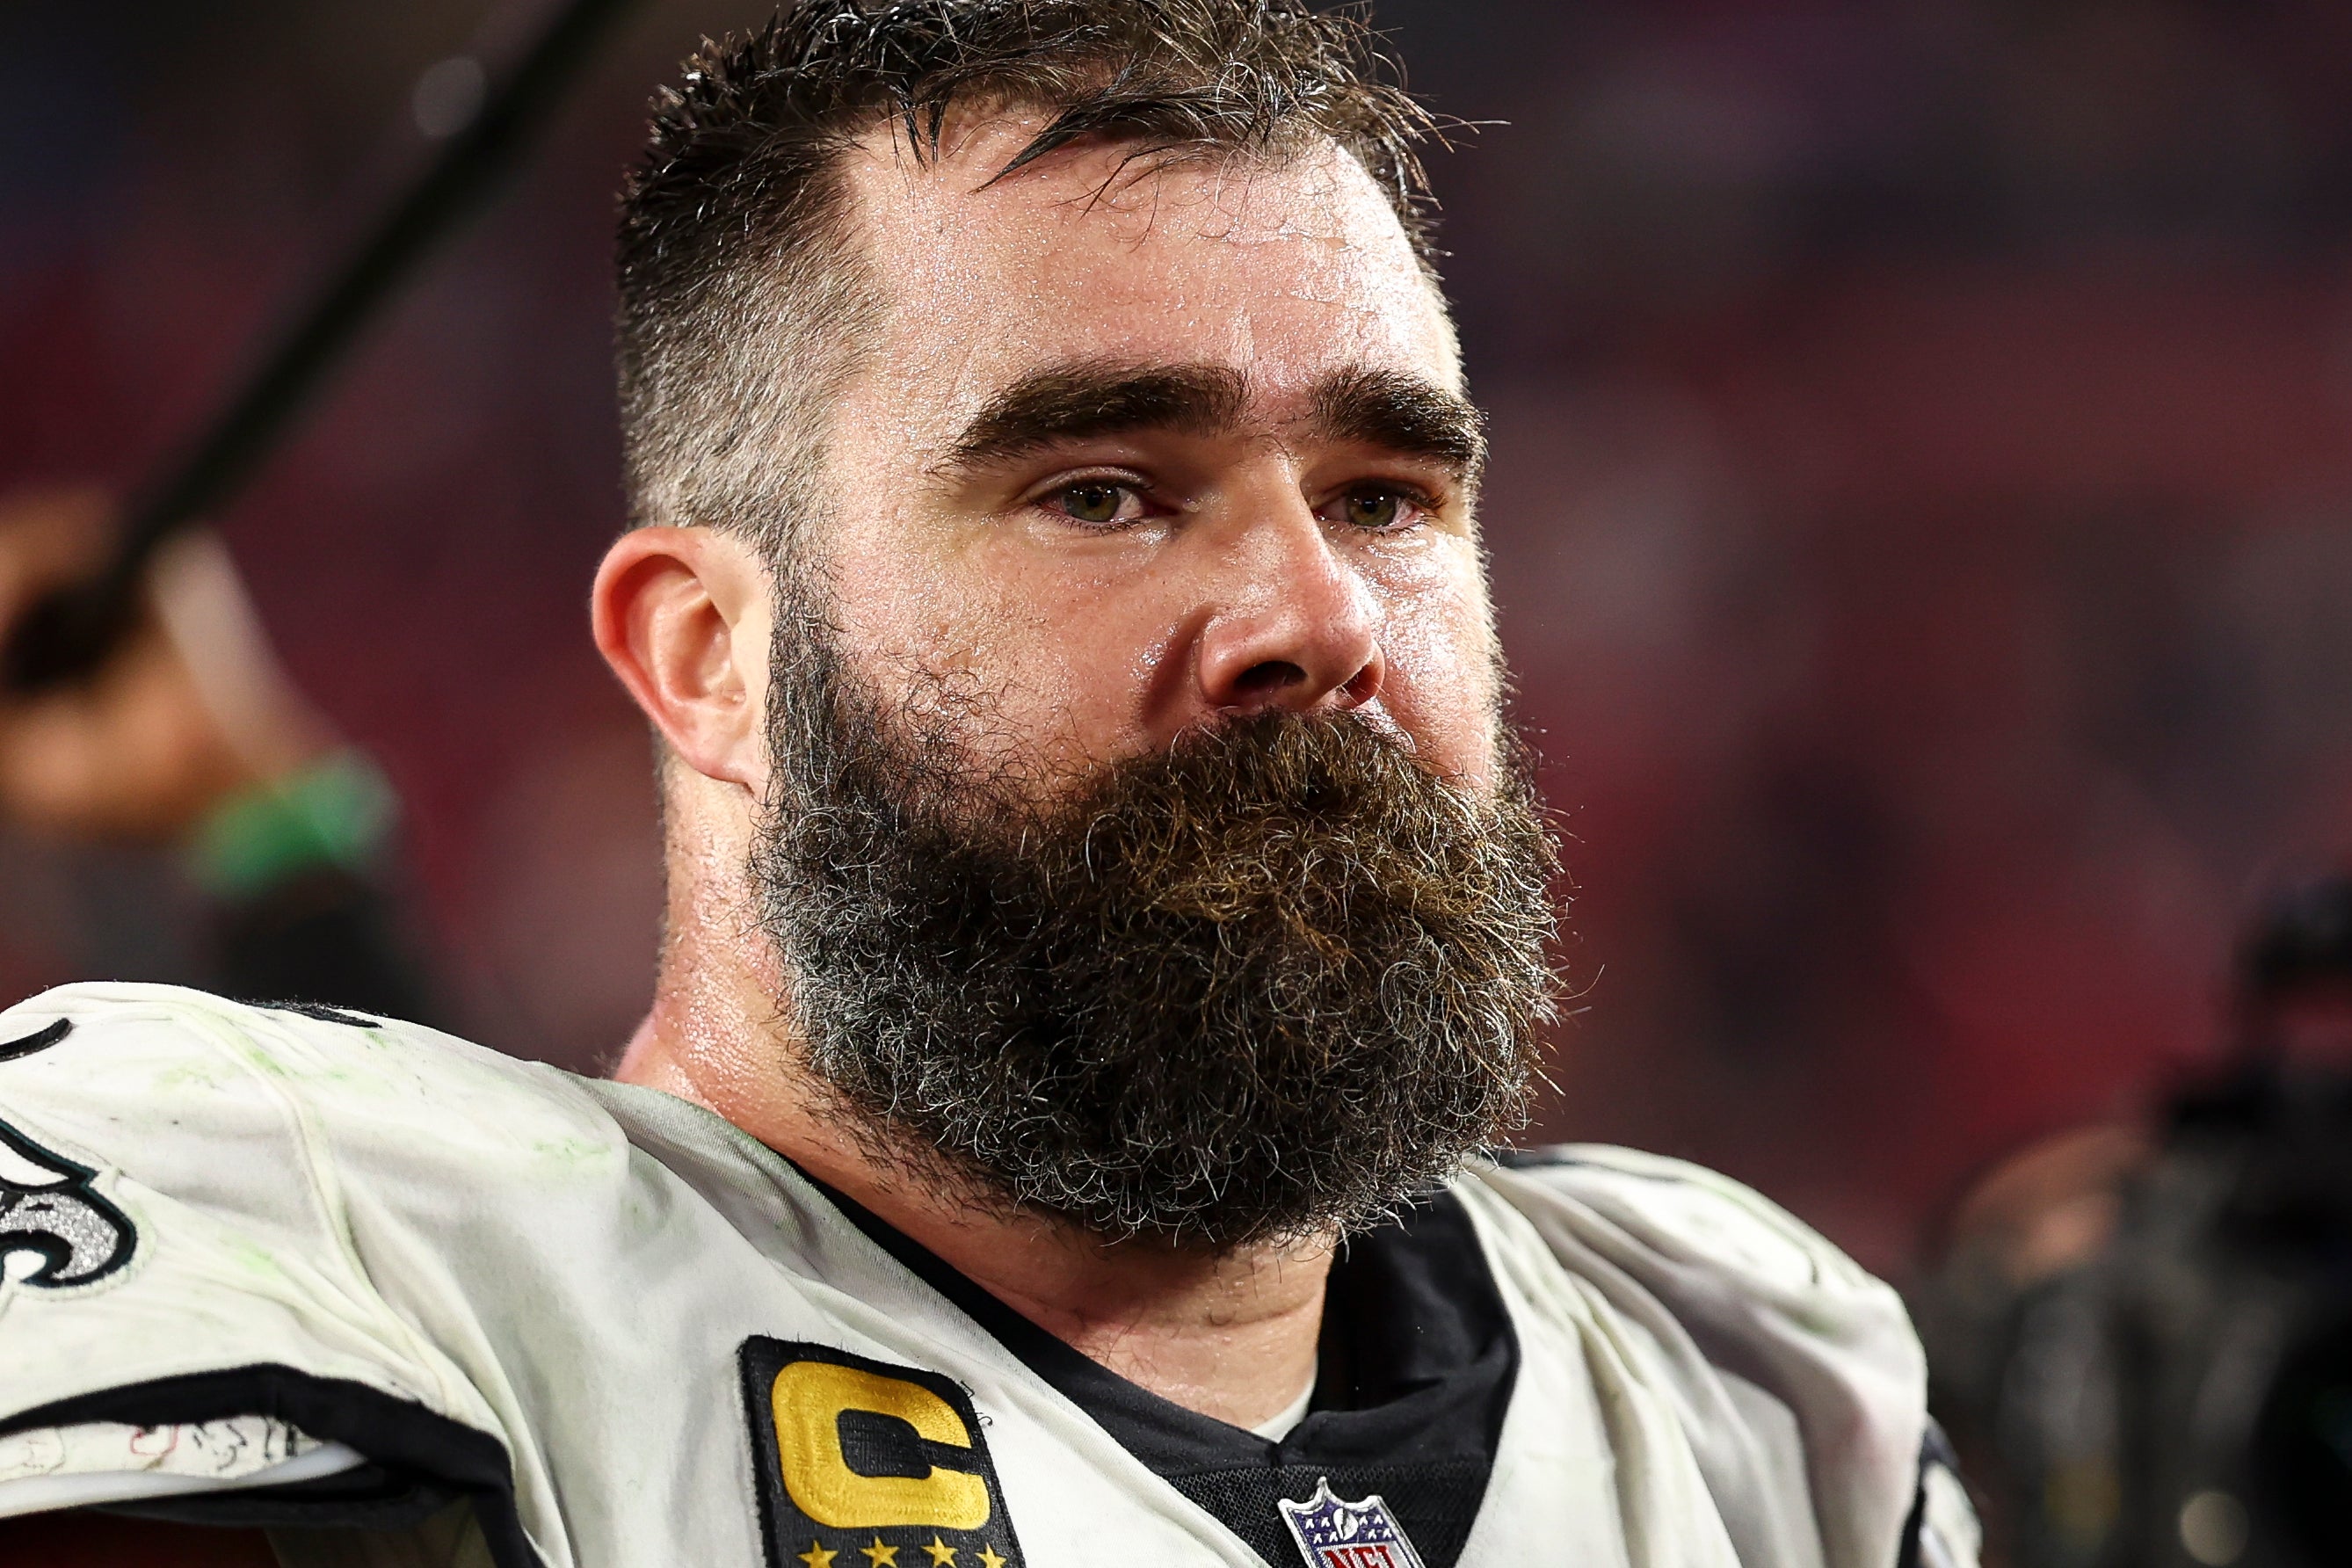 Jason Kelce Just Insisted That It’s “Cleaner” And “Healthier” To Only Wash “Hot Spots” On Your Body Regularly, And People Have Thoughts